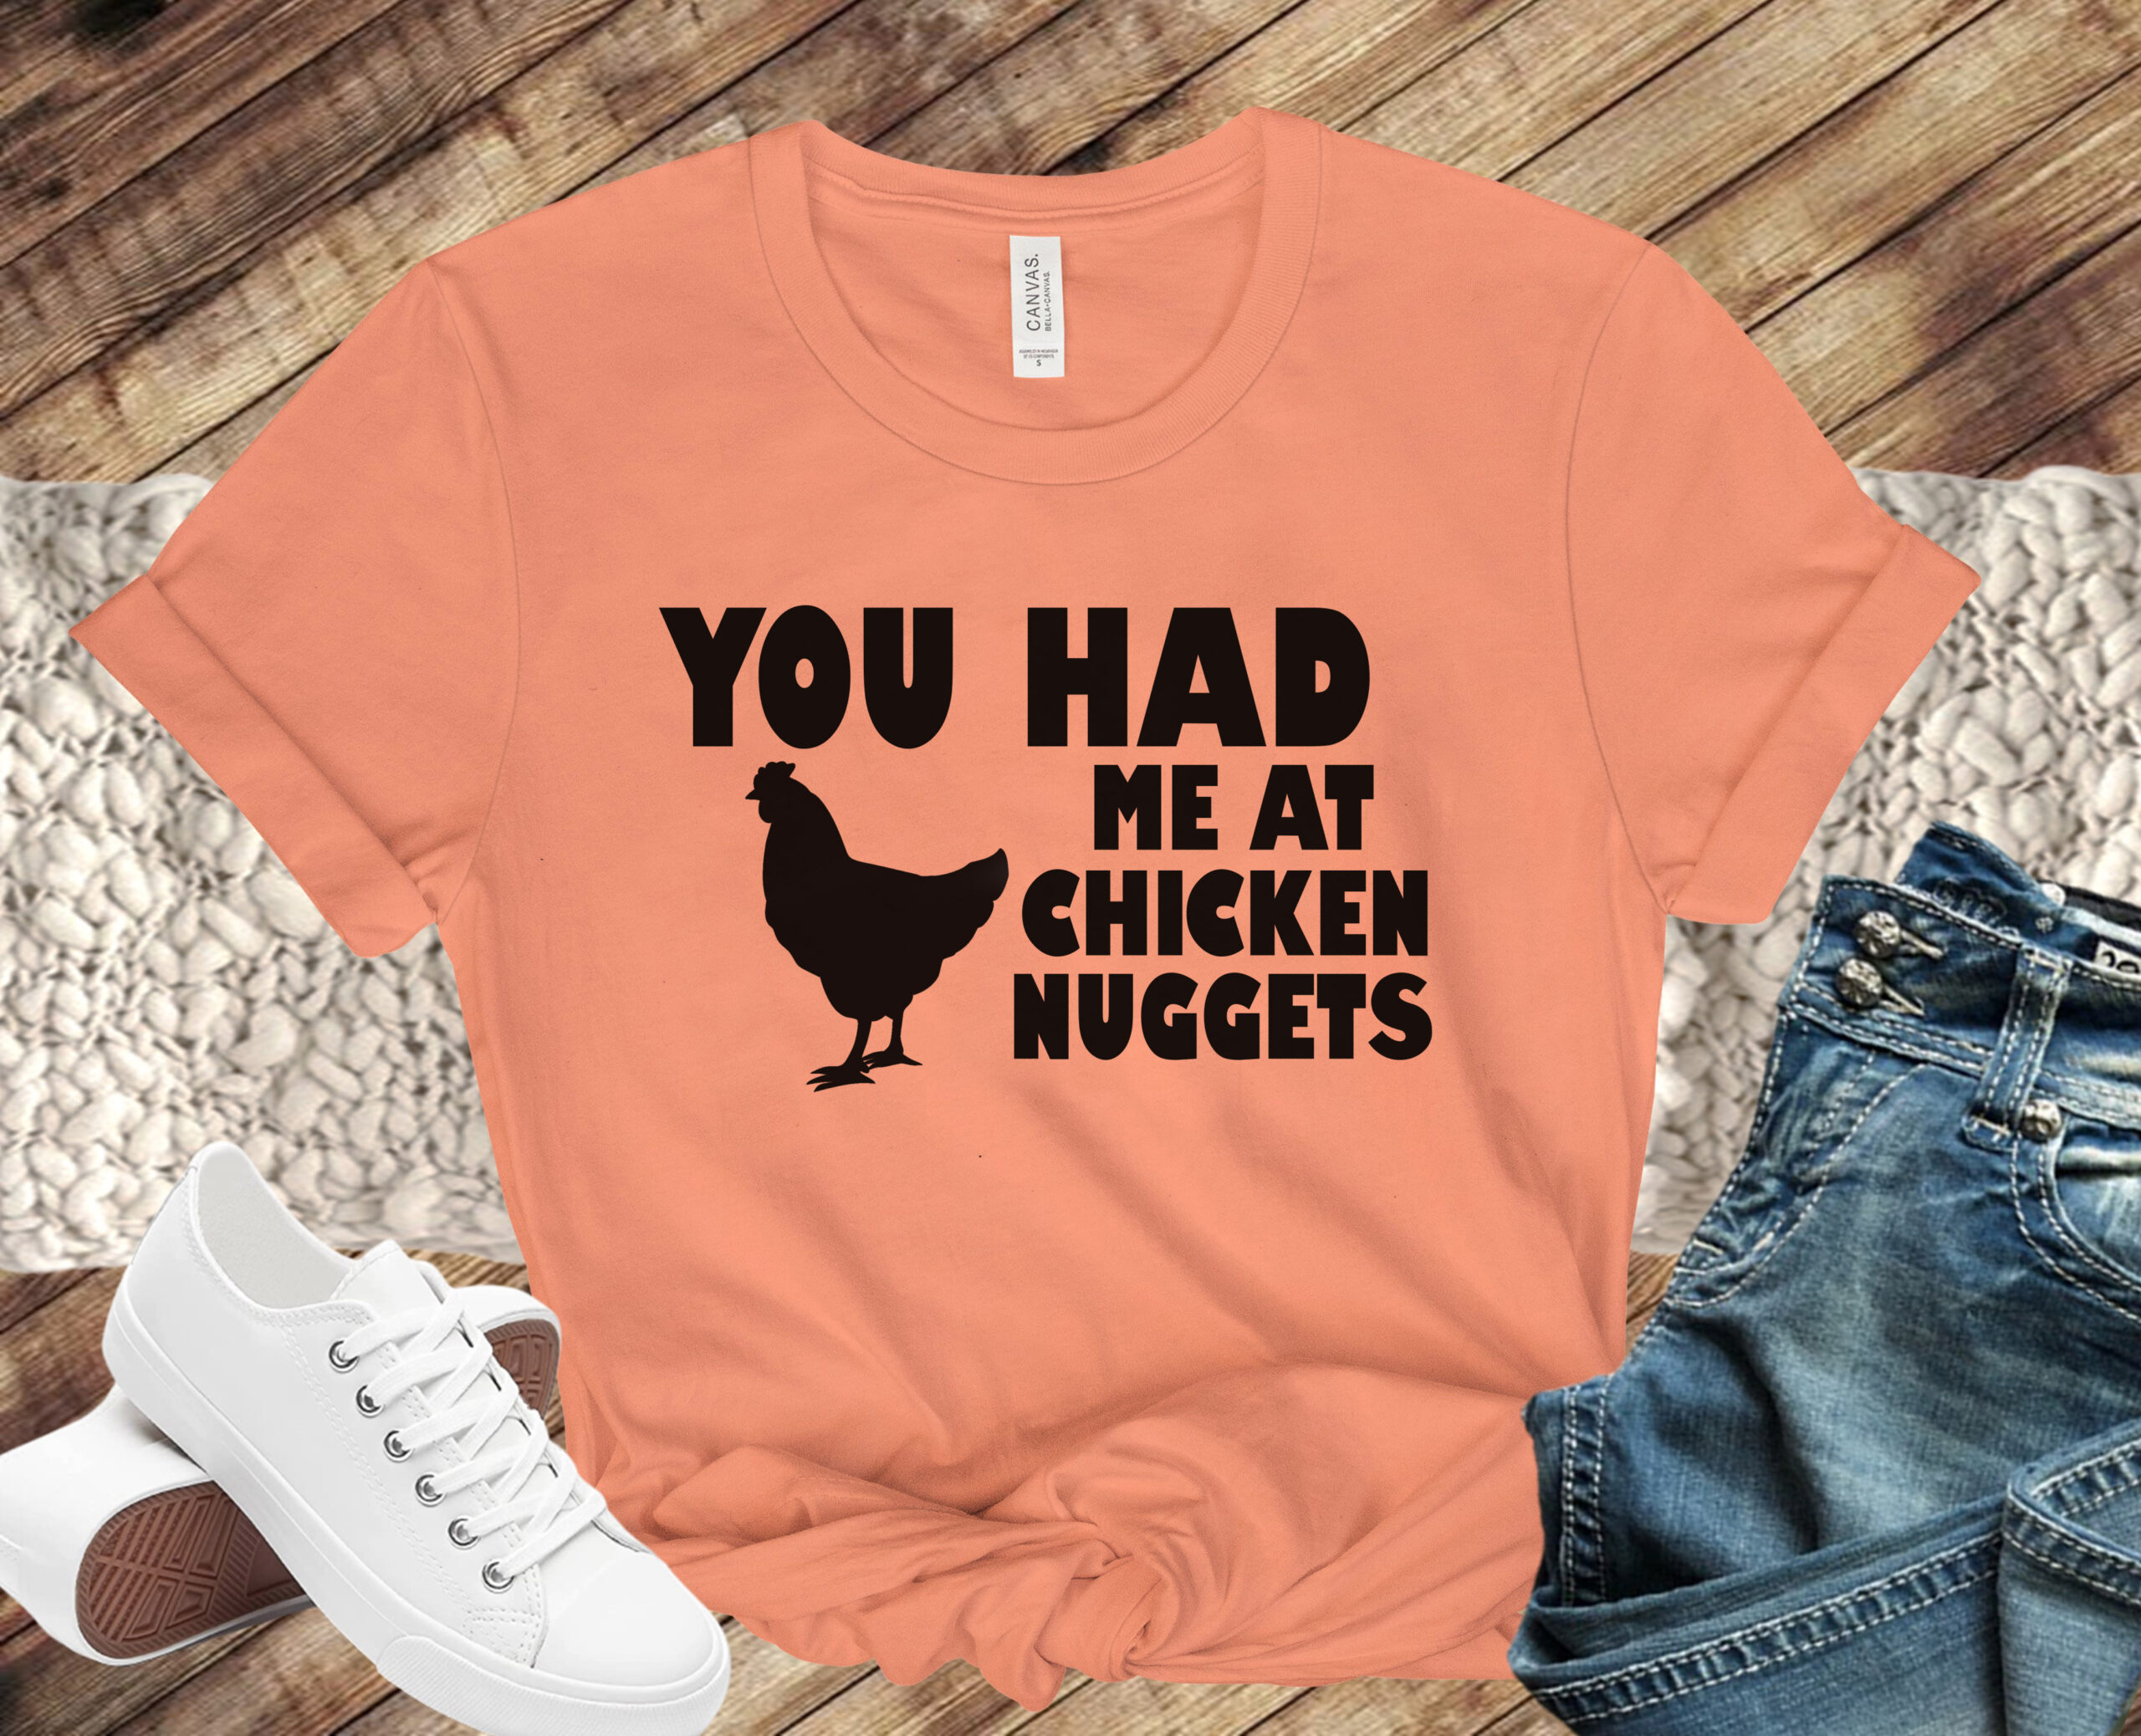 Free You Had Me At Chicken Nuggets SVG Cutting File for the Cricut.